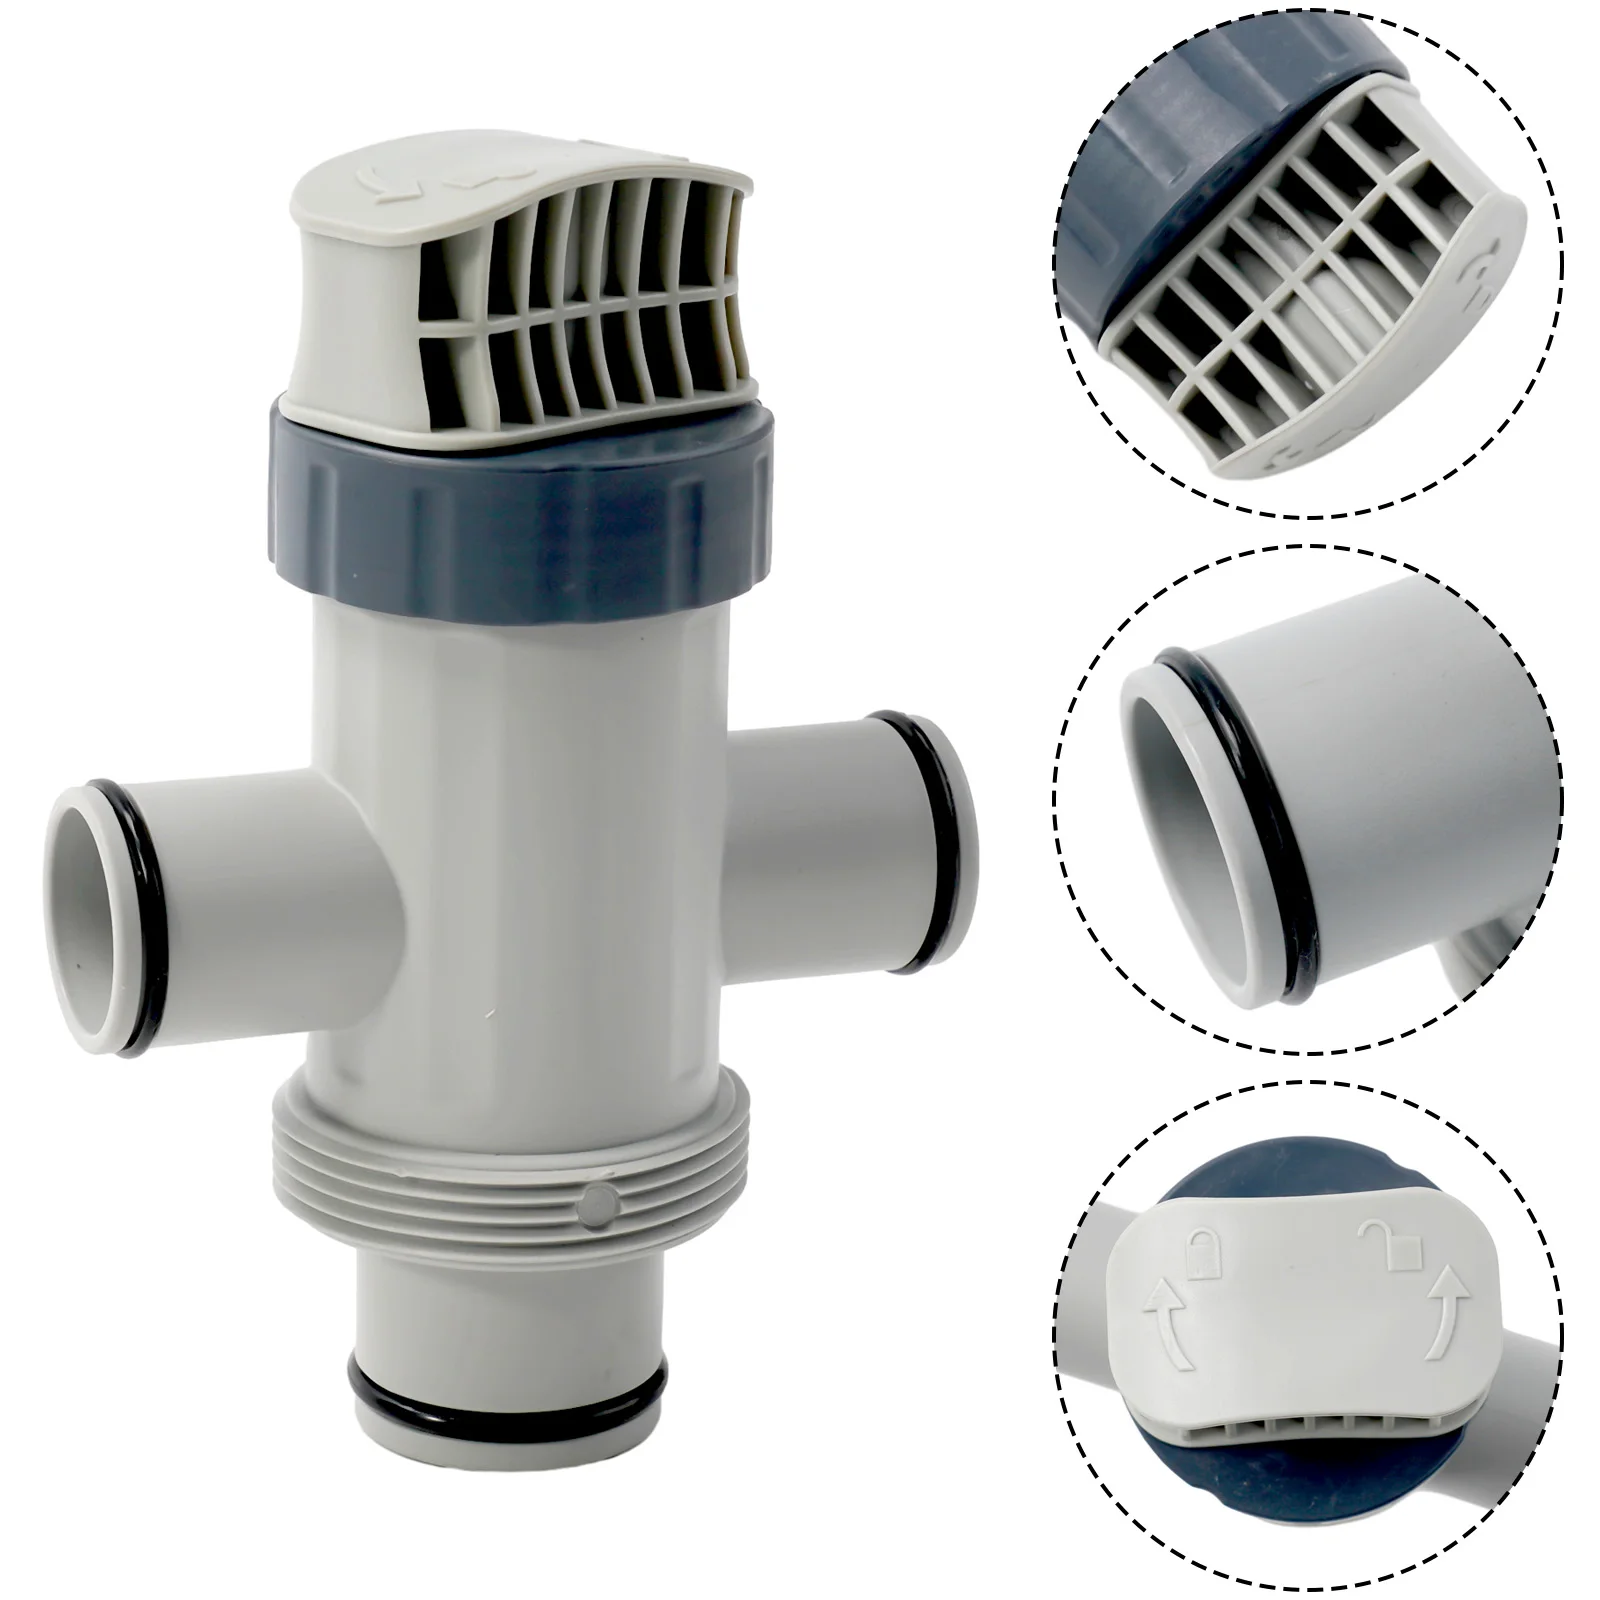 

Brand New Durable High Quality Plunger Valve Accessories Replacement Valve Part Dual Split For Intex Multi-functional